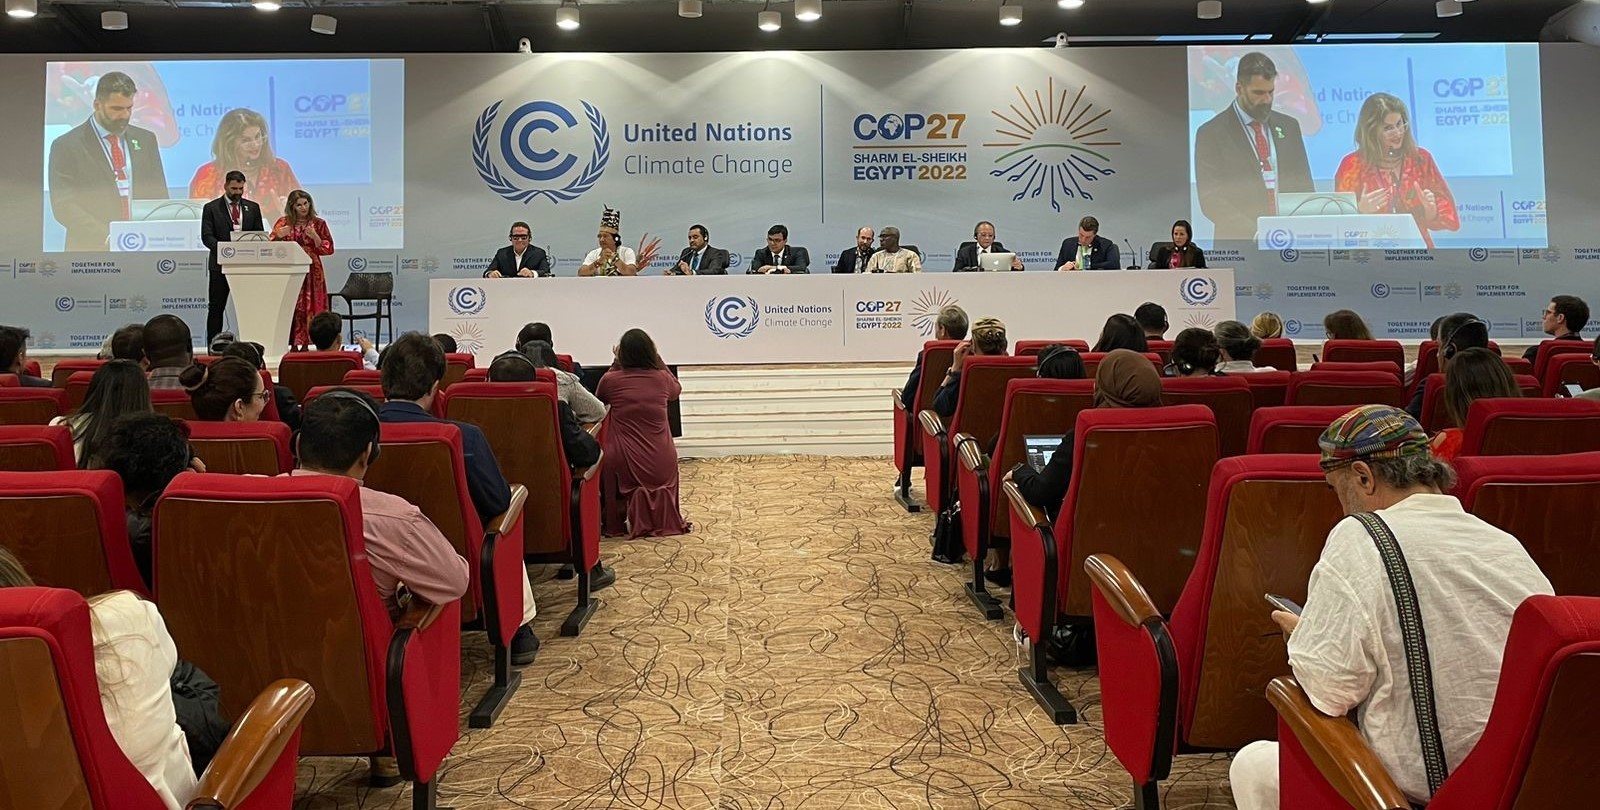 Subnational Solutions to Deforestation on Display at COP27